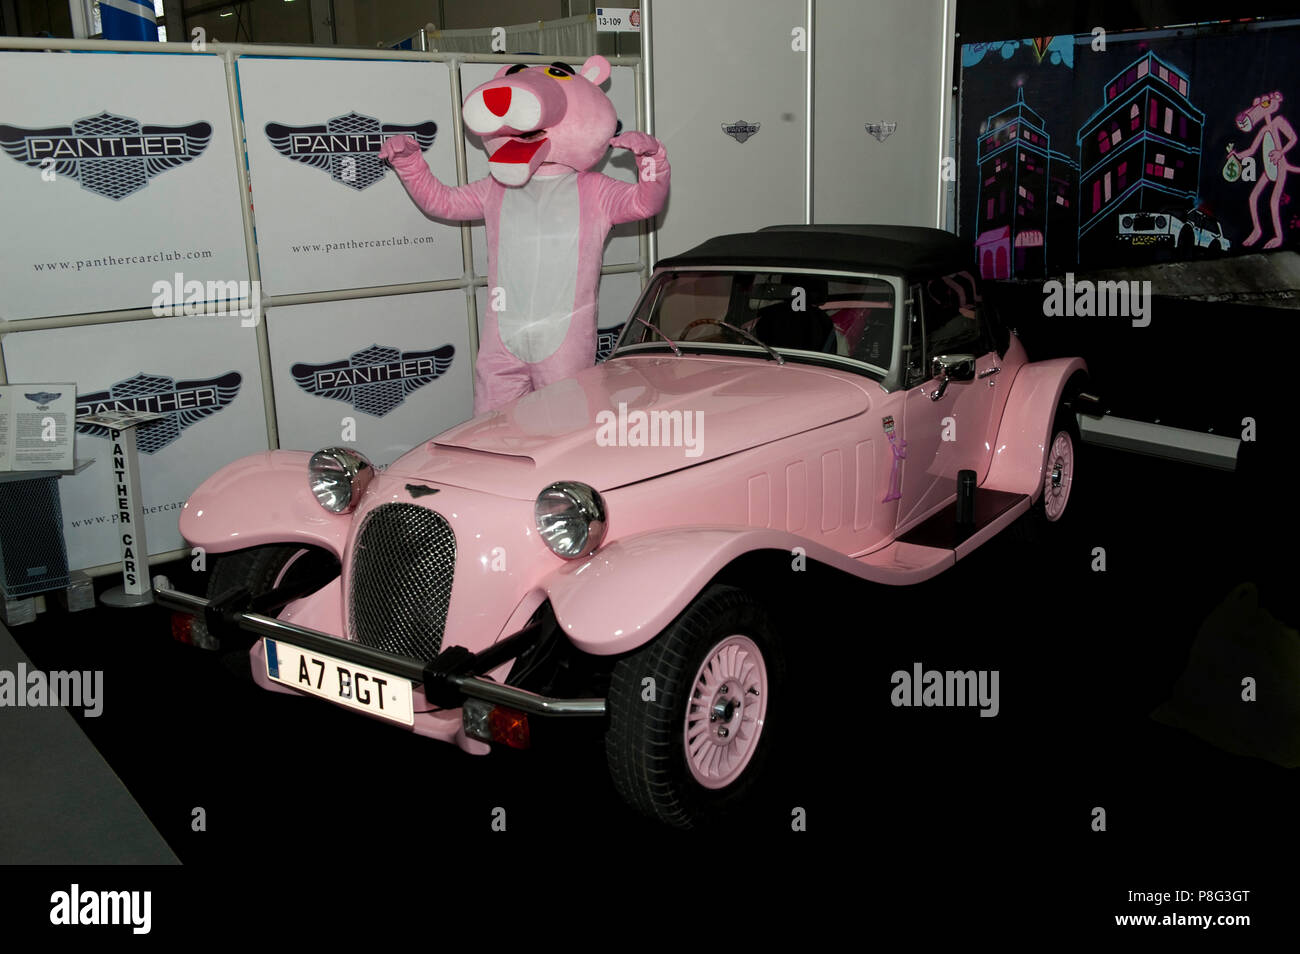 Panther Westwinds, England, Großbritannien, englisch Auto, Pink Panther, classic car Stockfoto